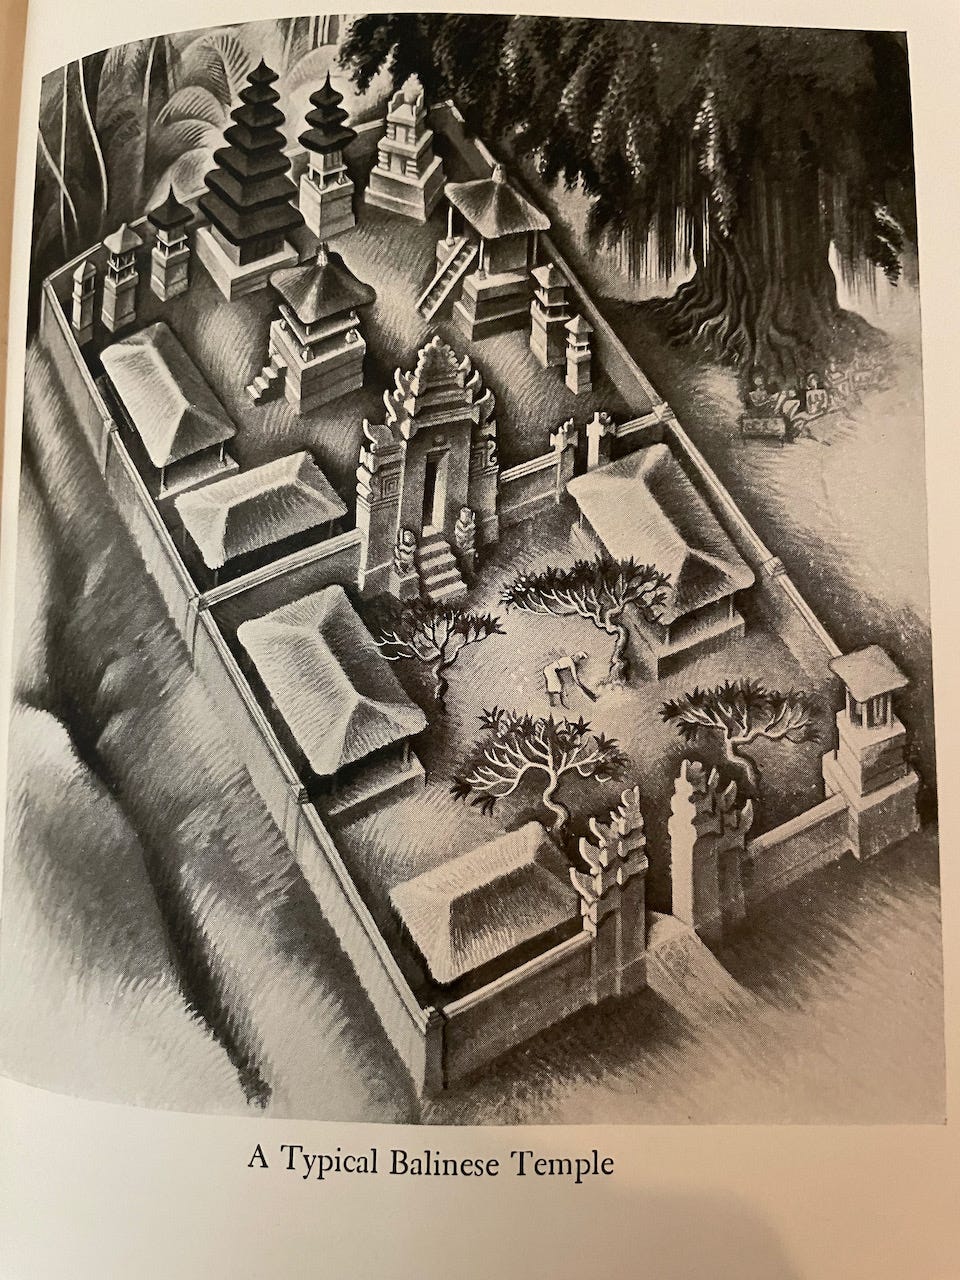 Illustration of a "Typical Balinese Temple" by Miguel Covarrubias